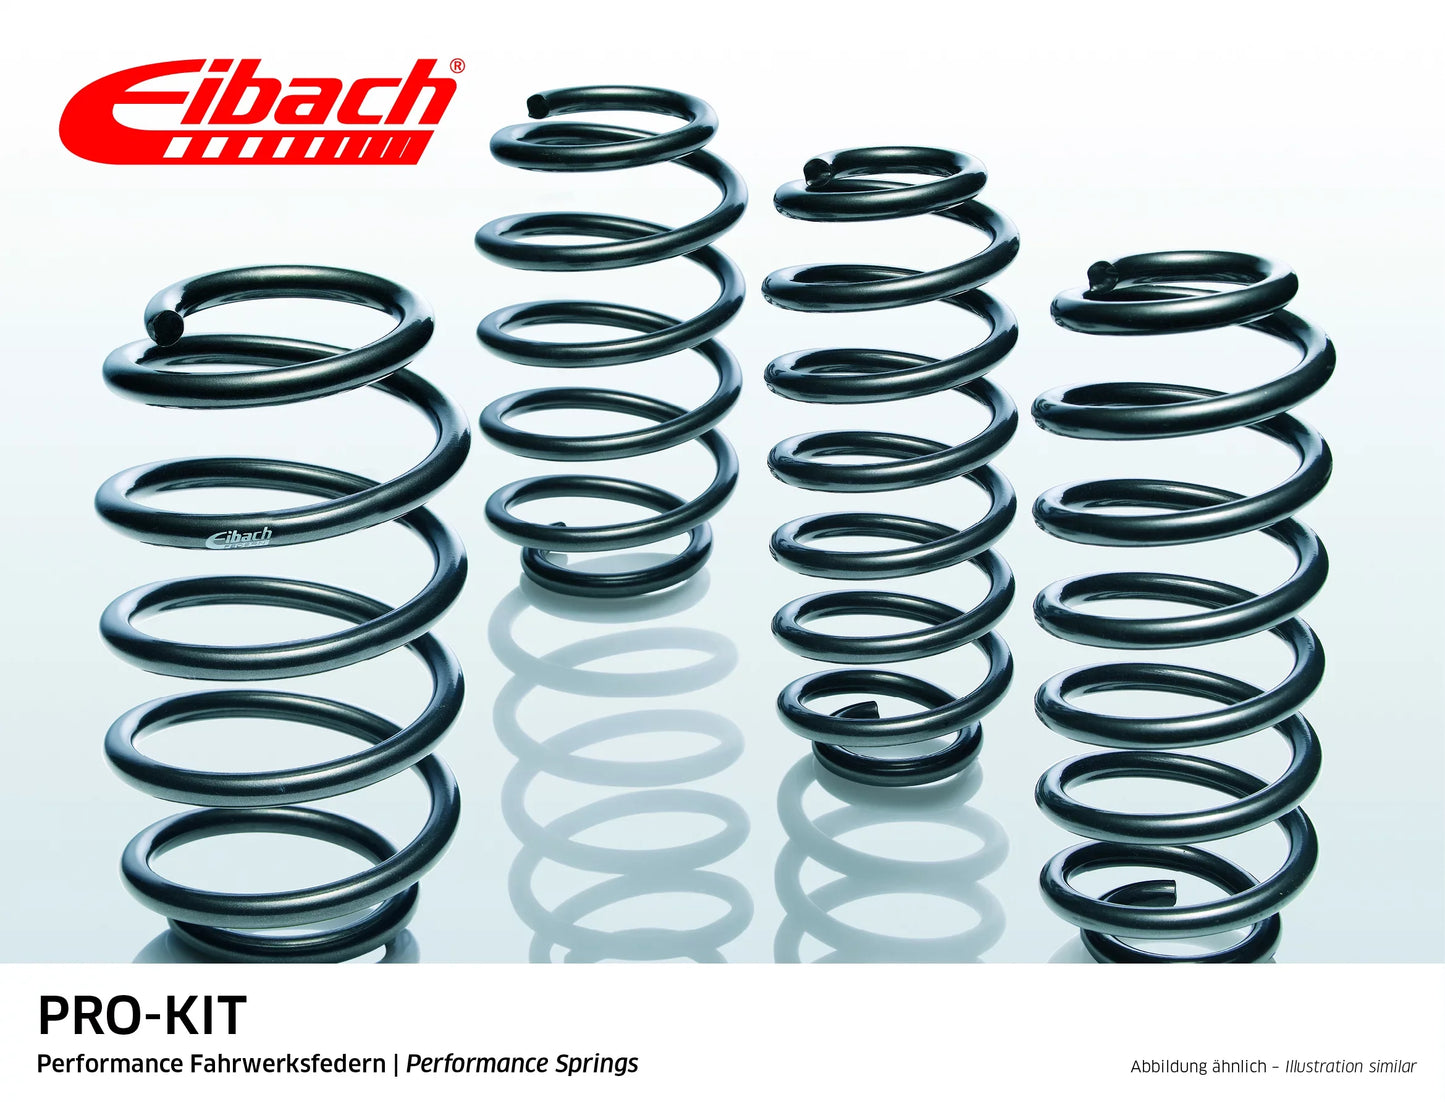 Eibach Pro-Kit Lowering Springs (E10-22-007-02-22) at £235.25